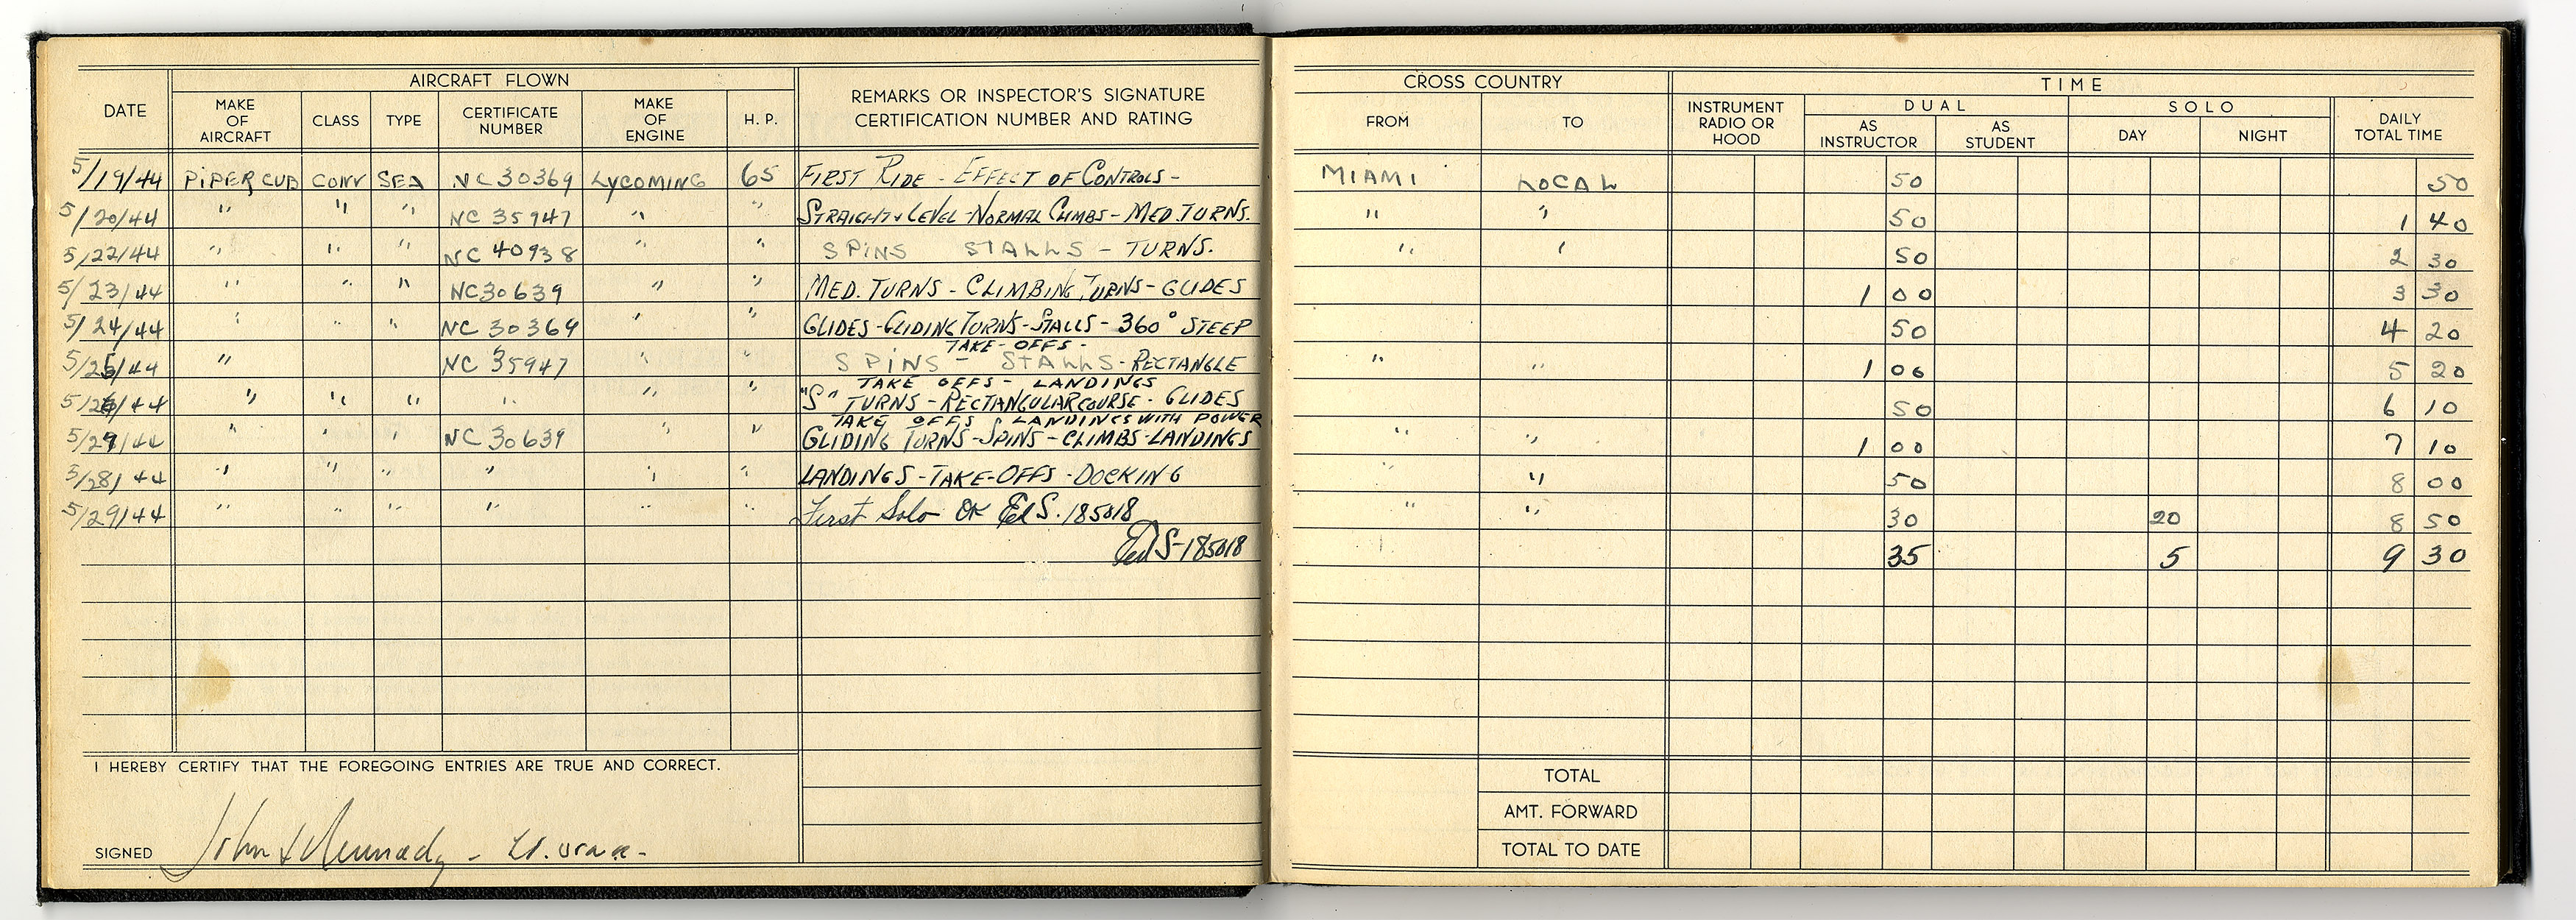 President John F. Kennedy 's flight logbook shows that he flew Piper Cub seaplanes from Embry-Riddle before soloing on his birthday, May 29, 1944, in Miami. Photo courtesy of Embry-Riddle Aeronautical University.